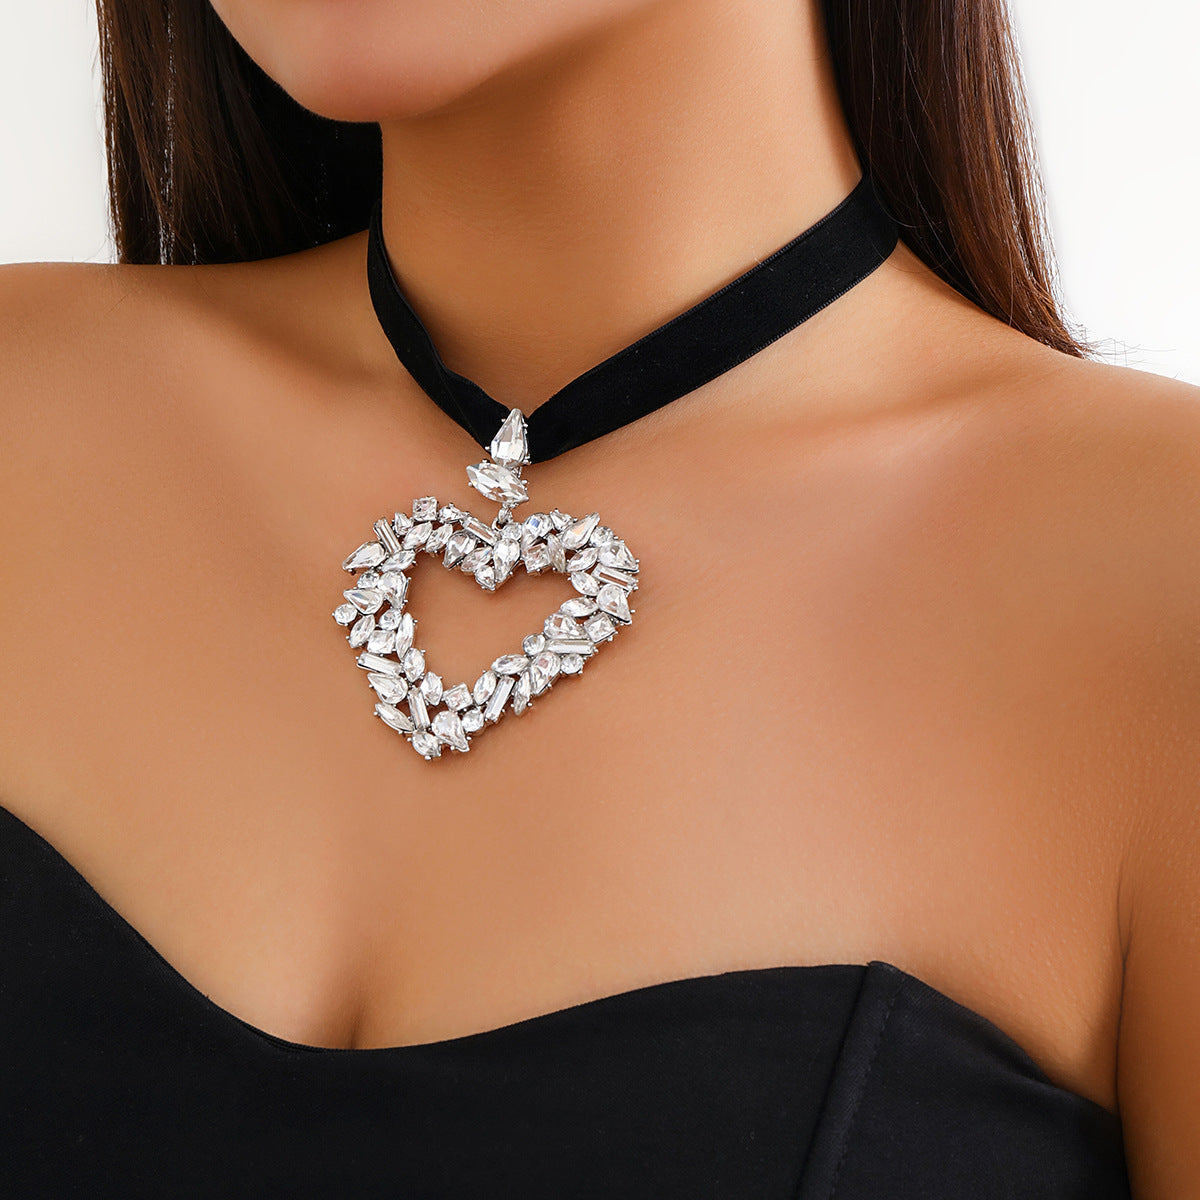 Bold Love Choker Jewelry Featuring European and American Cross Border, Statement Design, Luxe Plush Cloth, Water Diamond Necklace, and Accesory